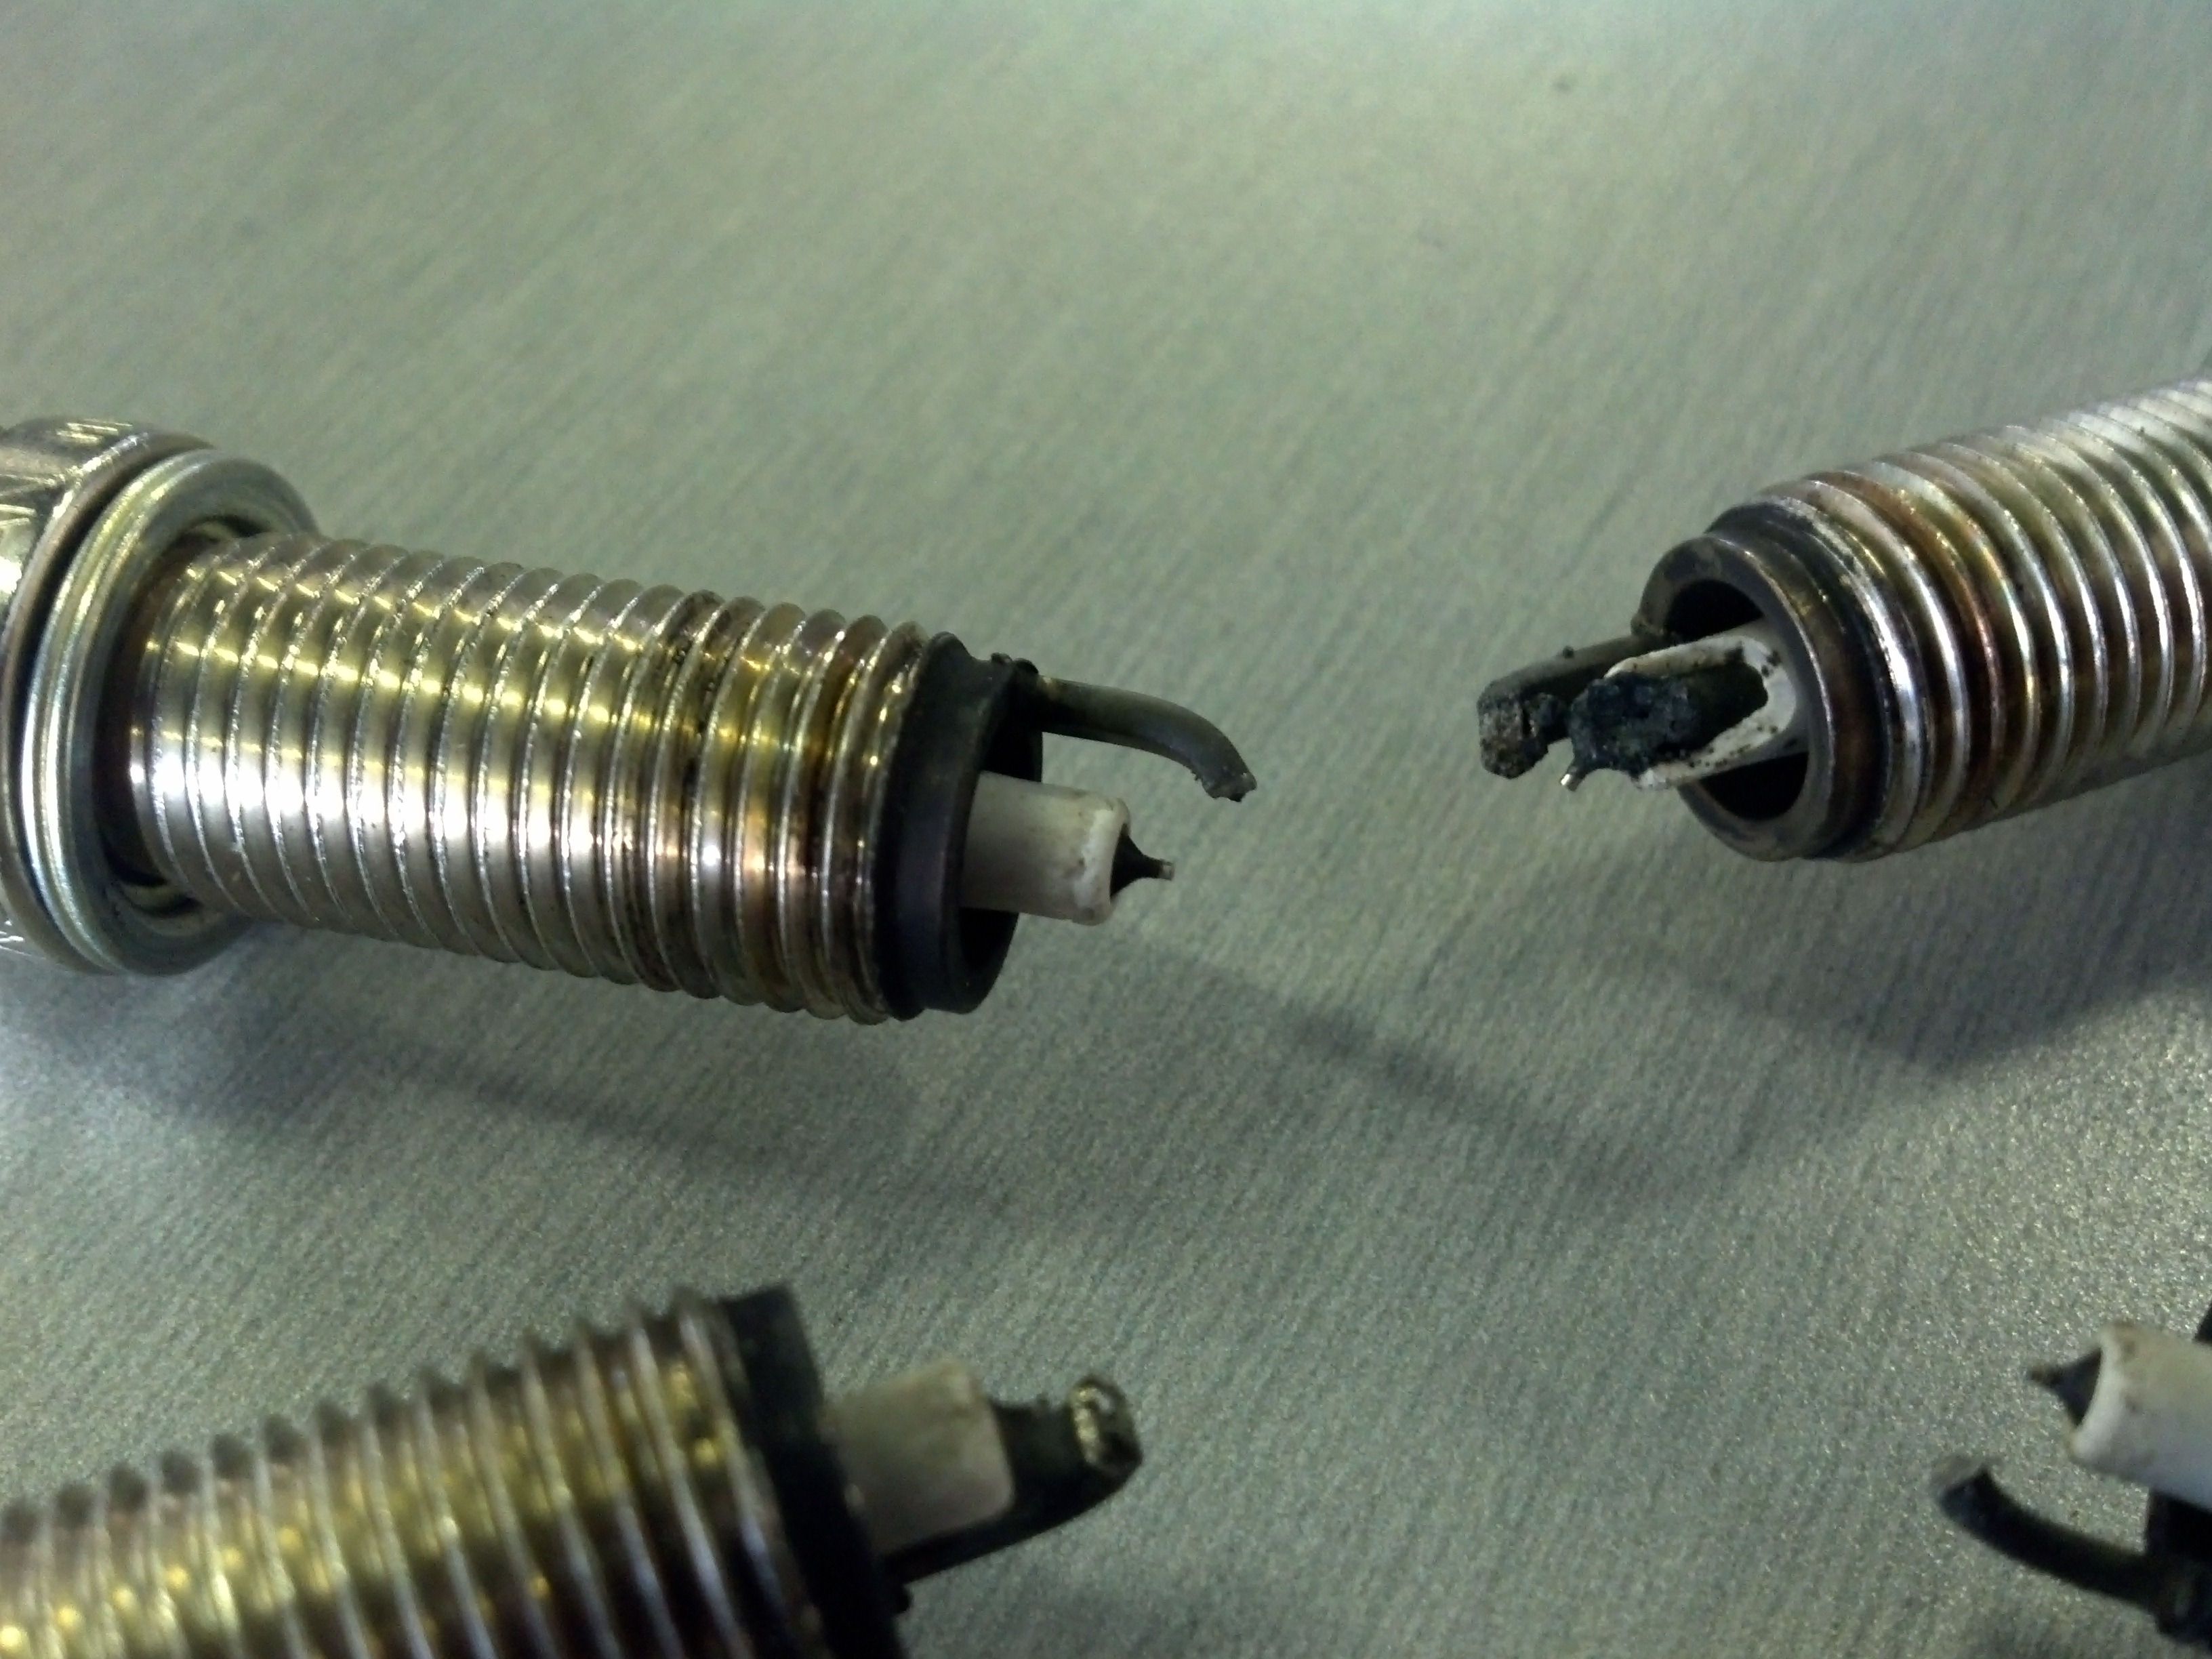 Spark plugs pulled from the failed engine